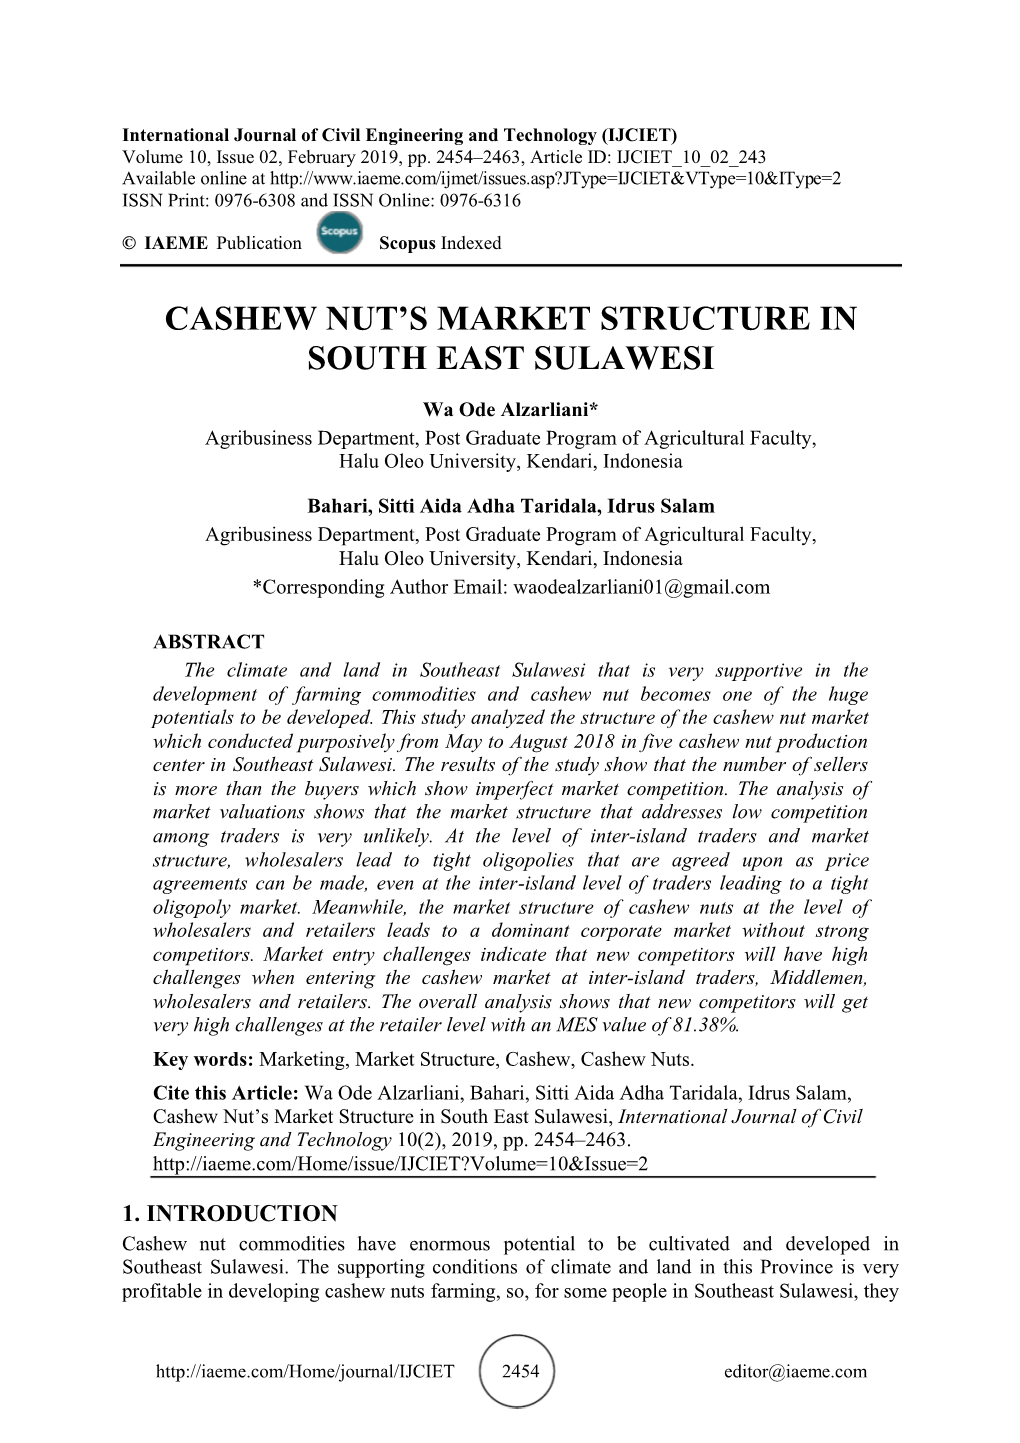 Cashew Nut's Market Structure in South East Sulawesi